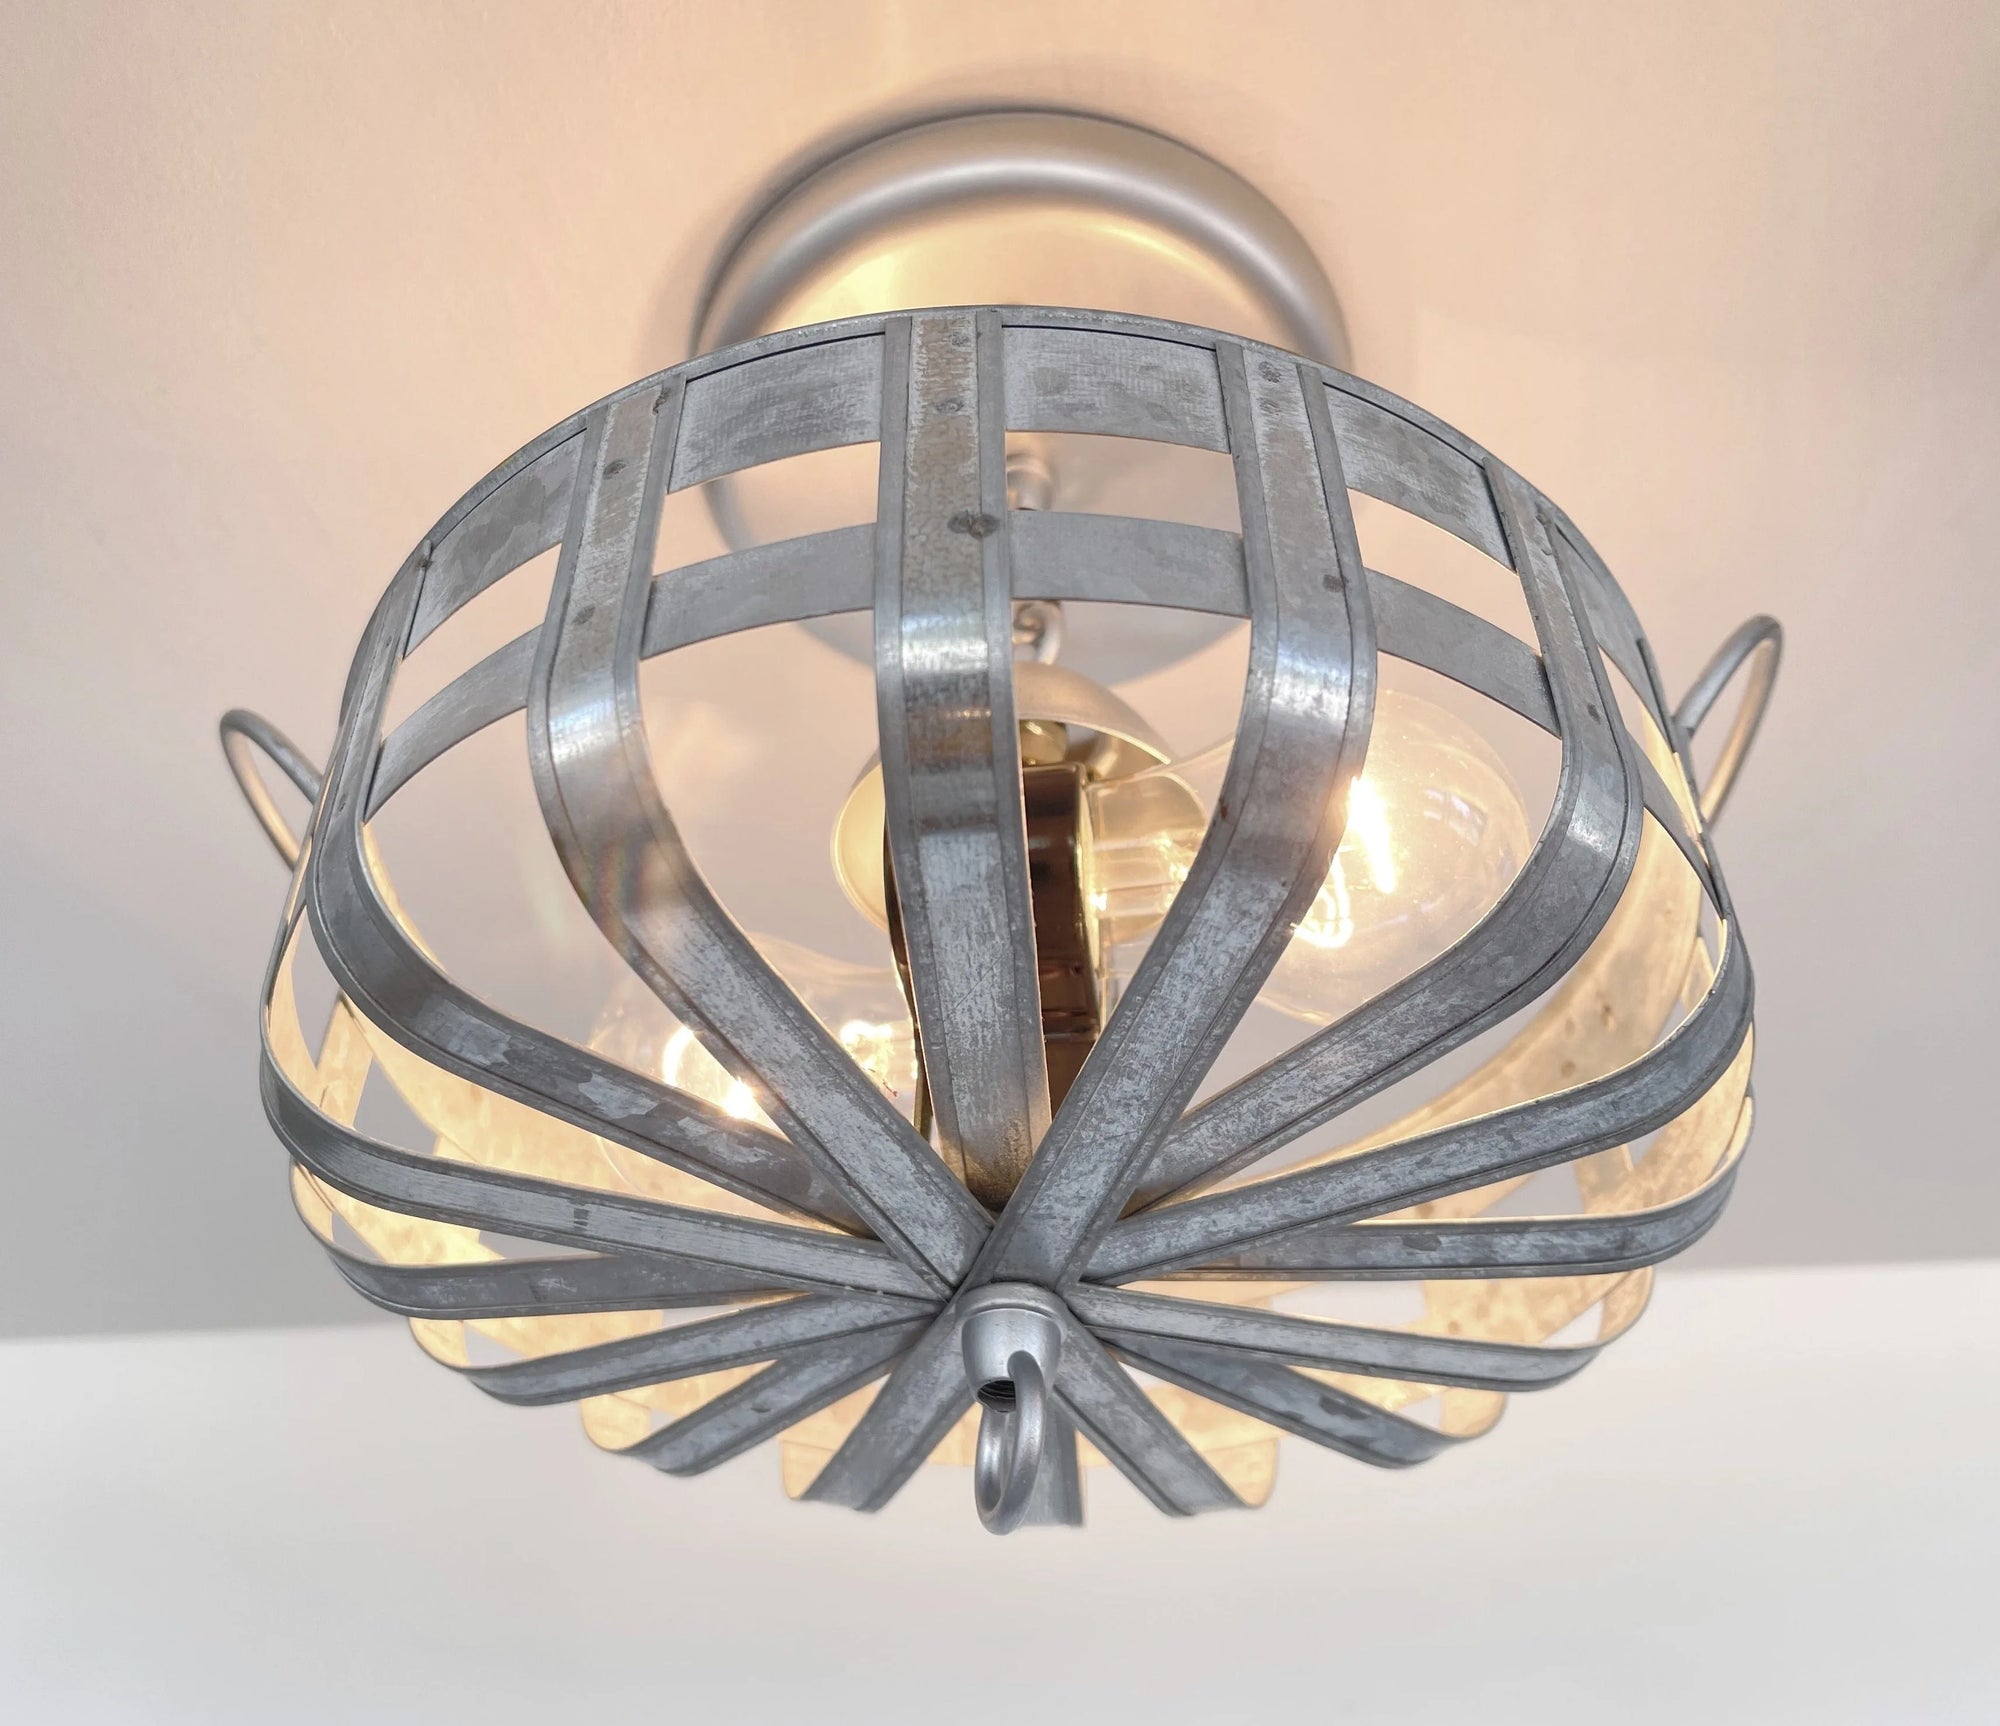 Petite Galvanized Strapped Metal Ceiling Light The Lamp Goods